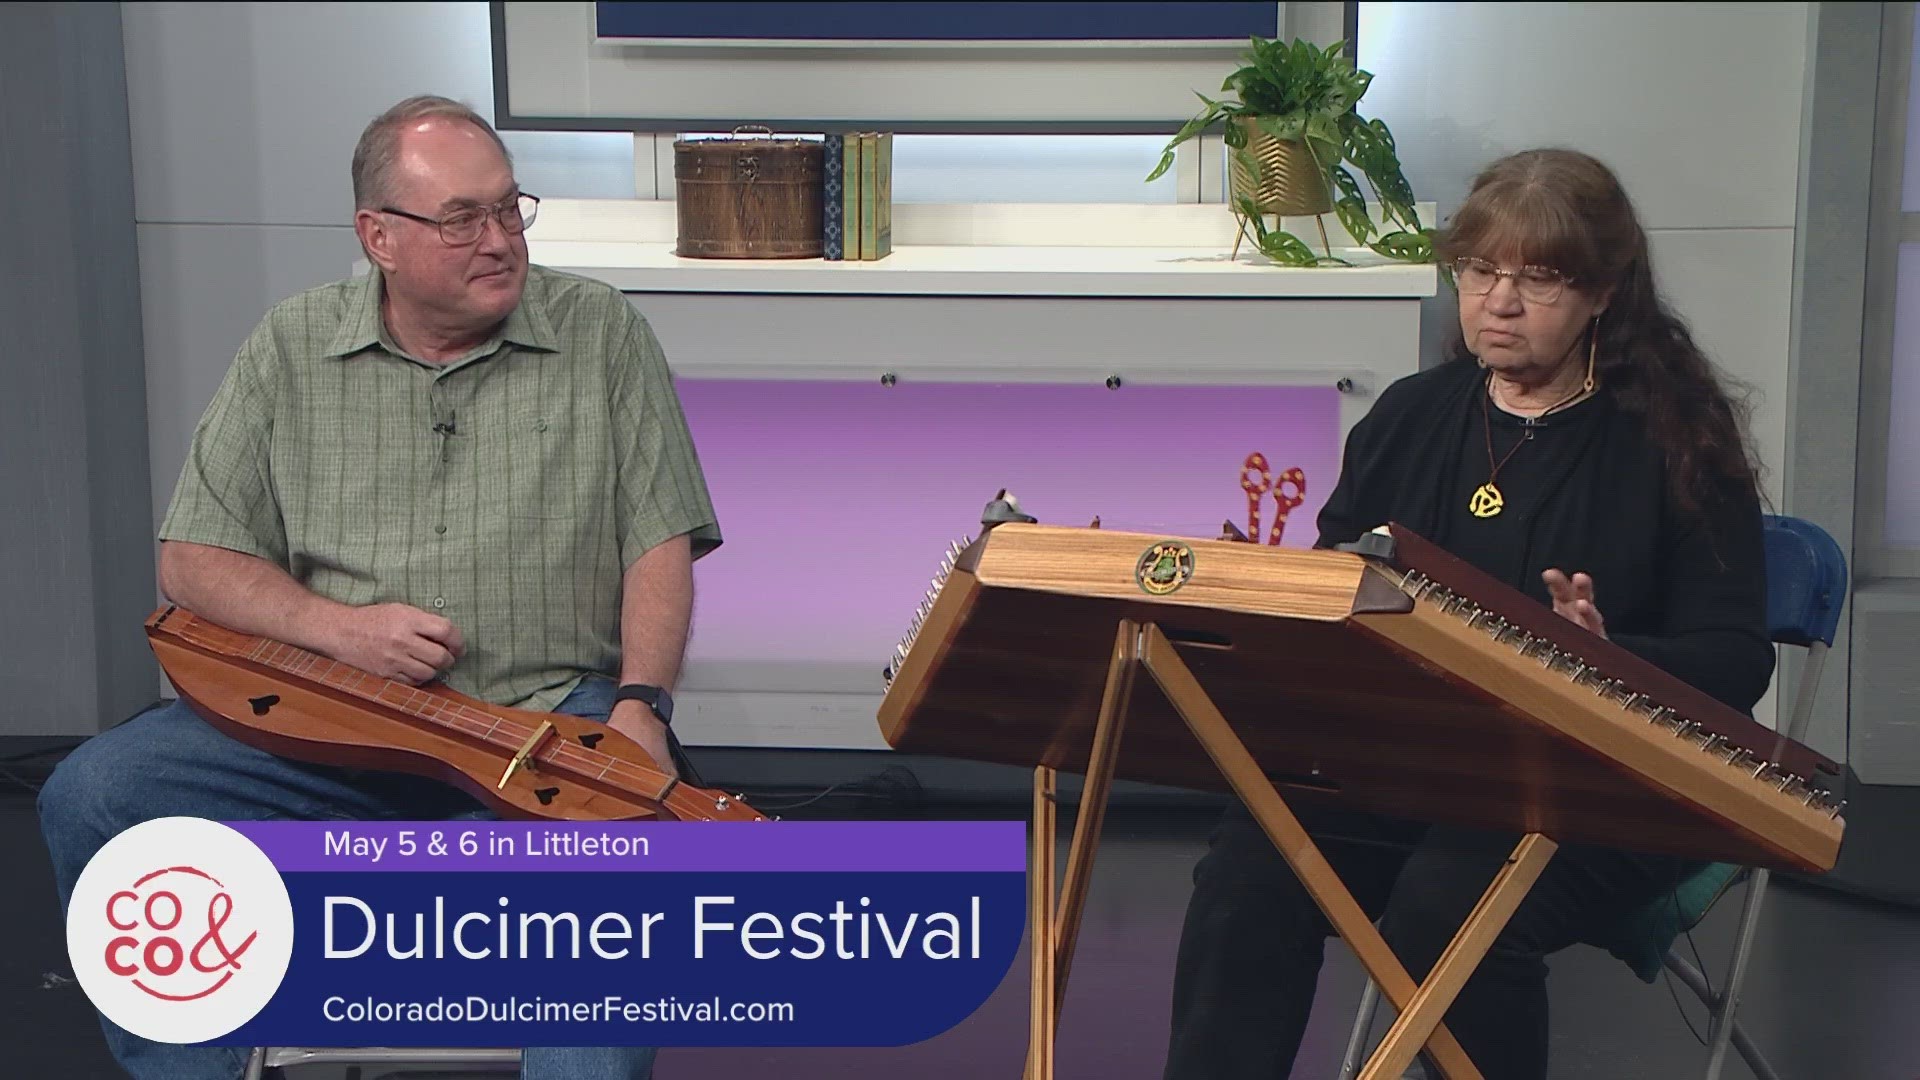 The Colorado Dulcimer Festival is May 5th and 6th at St. James Presbyterian Church in Littleton. Learn more and get tickets at ColoradoDulcimerFestival.com.